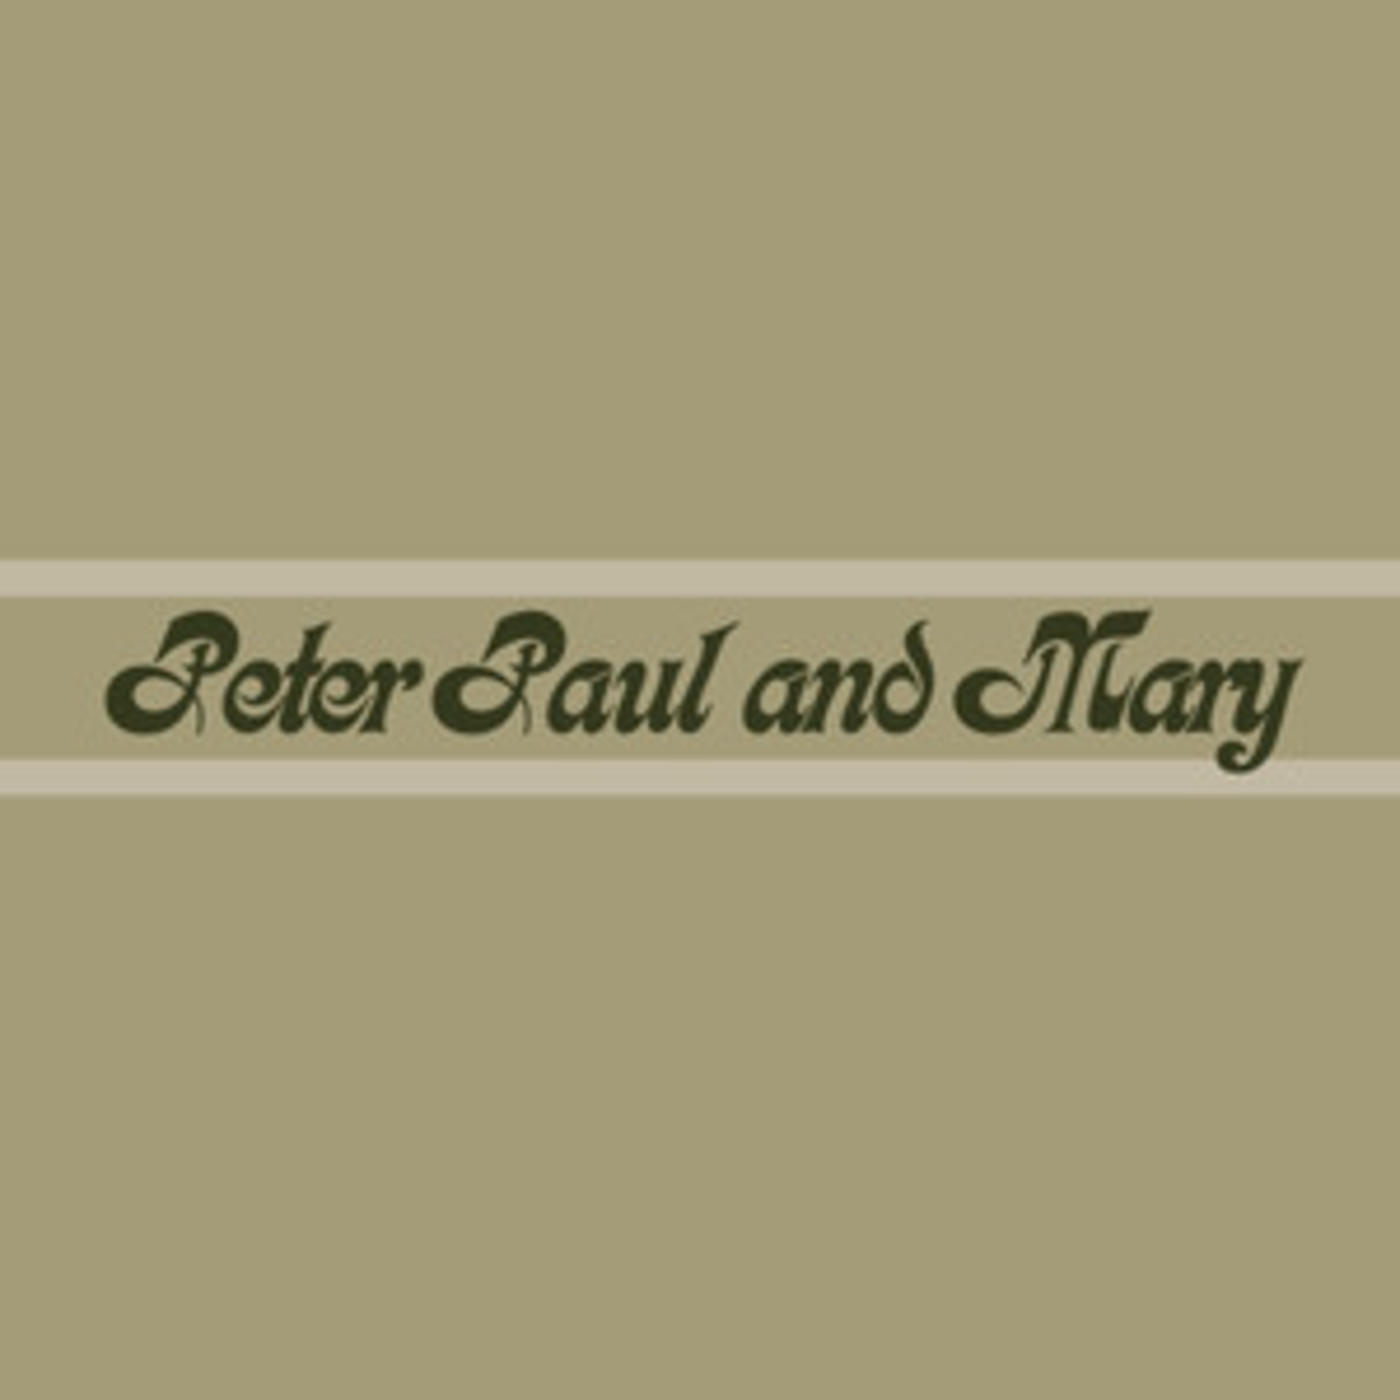 Official Peter, Paul and Mary playlist - Puff The Magic Dragon, Leaving On A Jet Plane, 500 Miles